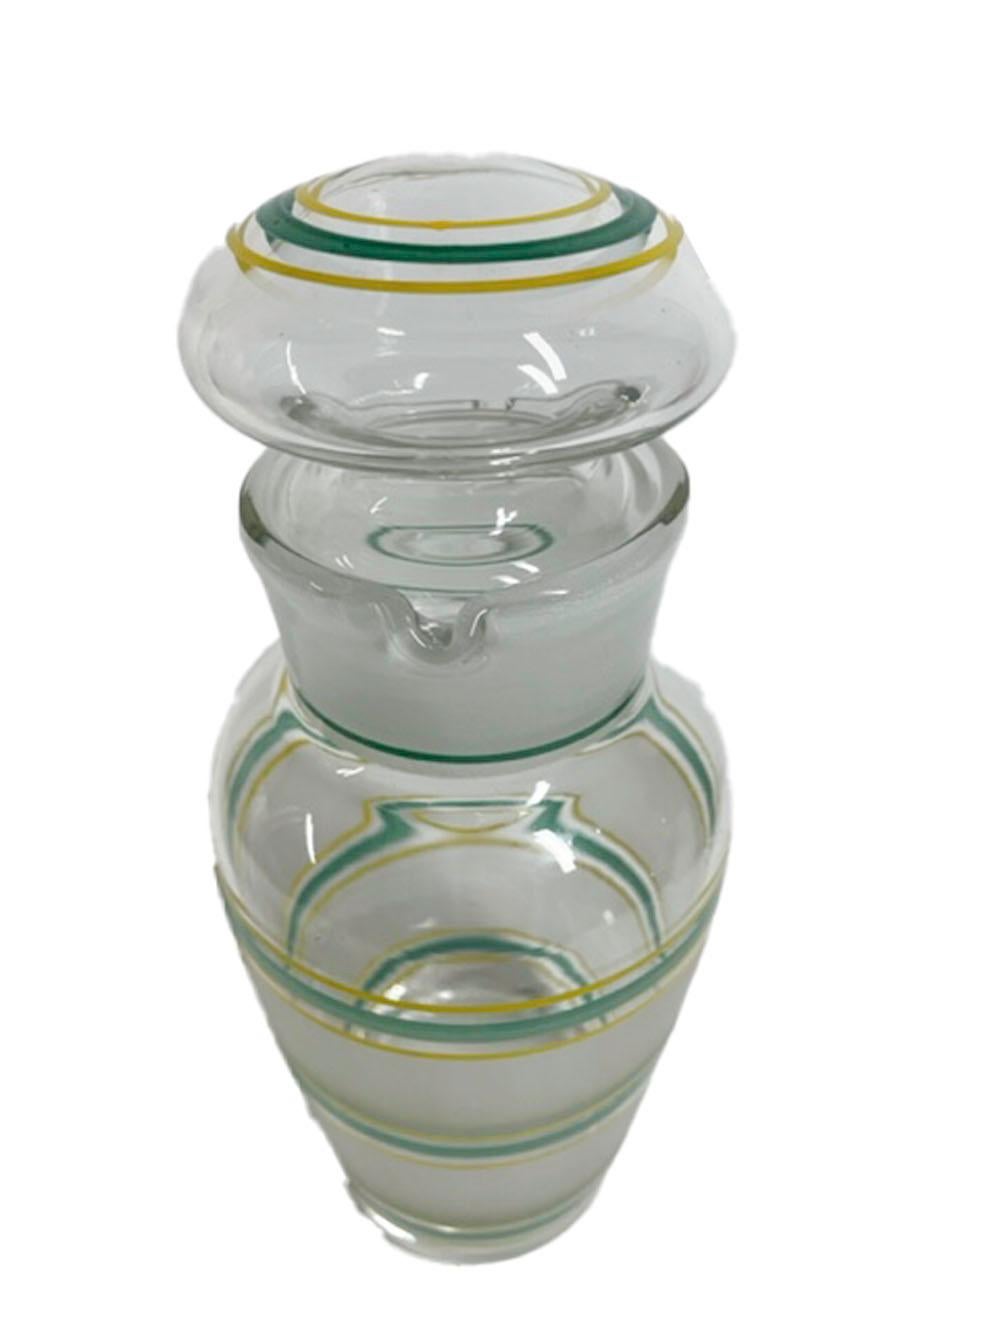 English Art Deco glass cocktail shaker with double pour-spout mouth and polished pontil, decorated with wide frosted bands between yellow and green painted lines.